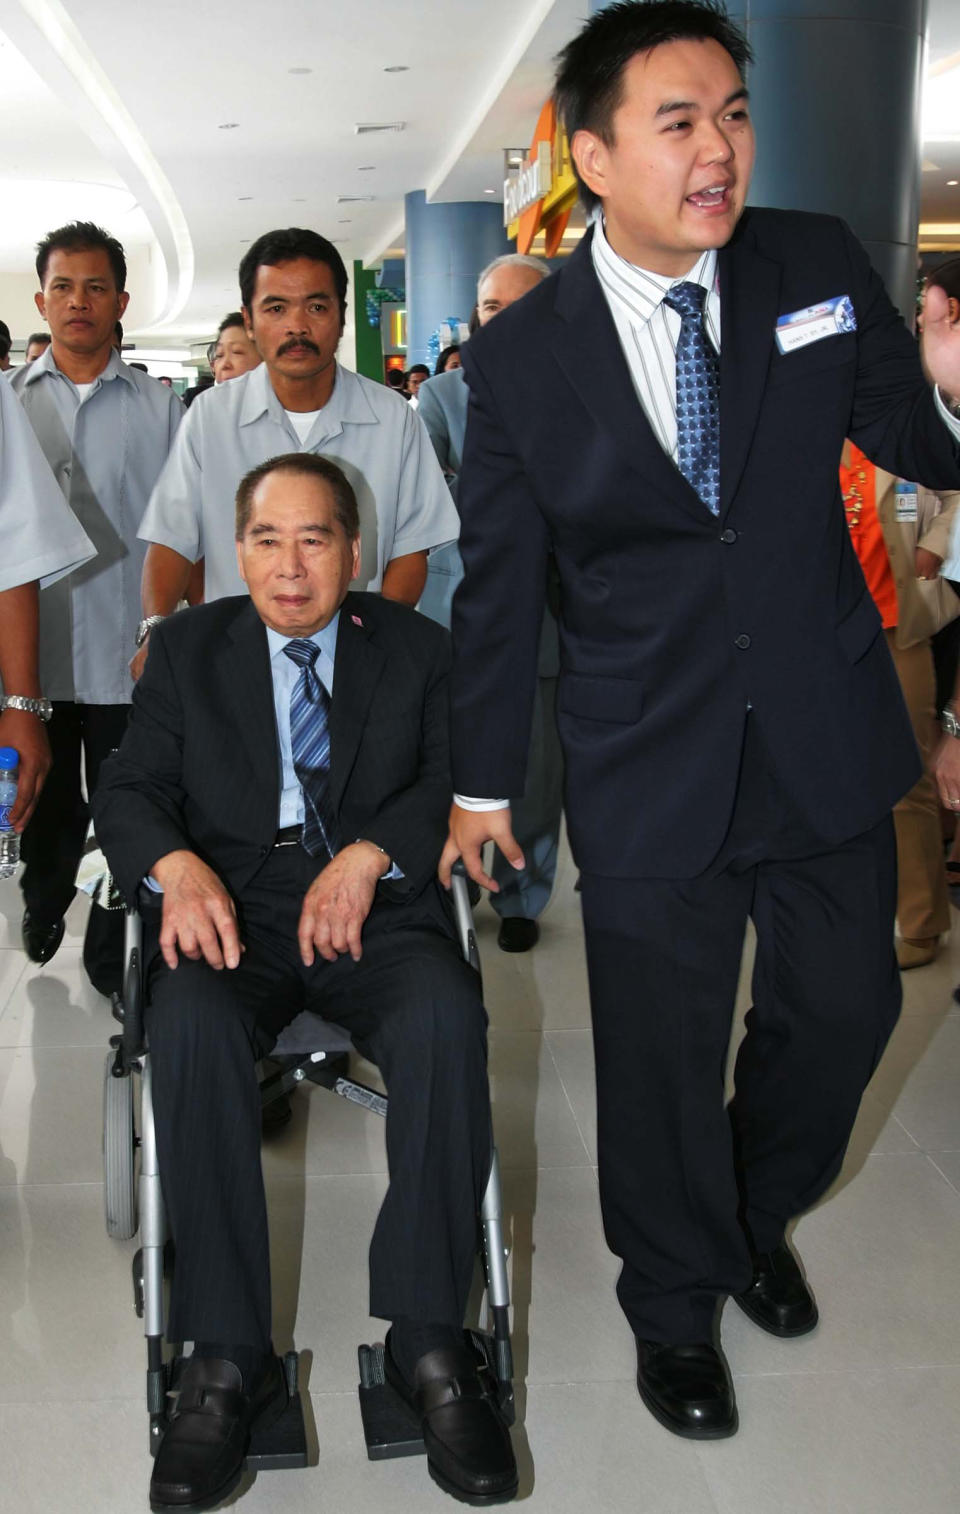 FILE – In this May 20, 2006 file photo, Henry Sy Sr., left, patriach of the Sy family and chairman of the SM Prime Holdings Inc. sits on the wheel chair as he is escorted by his grandson Hans Sy Jr. right, during the opening of the SM Mall of Asia in suburban Pasay City, south of Manila, Philippines. Macau gambling company Melco Crown Entertainment is teaming up with the Philippines’ richest man to develop a $1 billion Manila casino resort in a sign of the industry’s plans for rapid expansion in Asia. Melco said late Thursday, July 5, 2012 it will develop the project with three companies controlled by Philippine tycoon Henry Sy. Melco is jointly controlled by Lawrence Ho, who is the son of Macau casino king Stanley Ho, and by James Packer, the son of late Australian media magnate Kerry Packer. (AP Photo/Pat Roque, File)